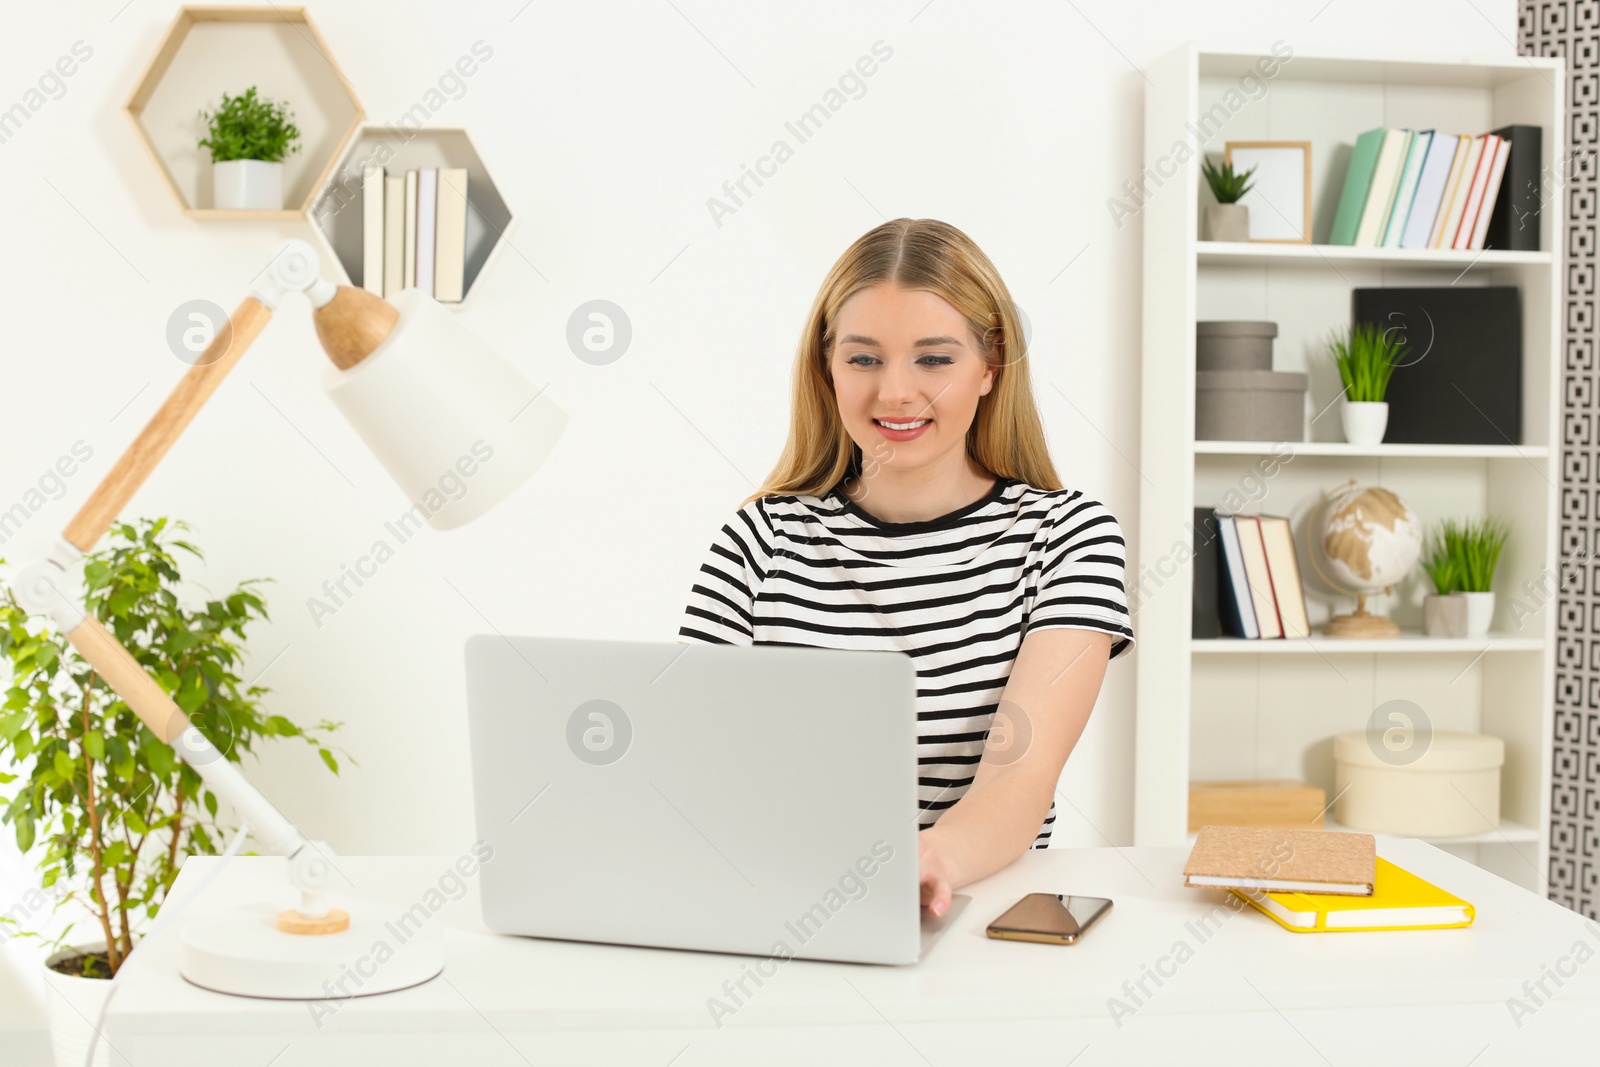 Photo of Home workplace. Woman working on laptop at white desk in room